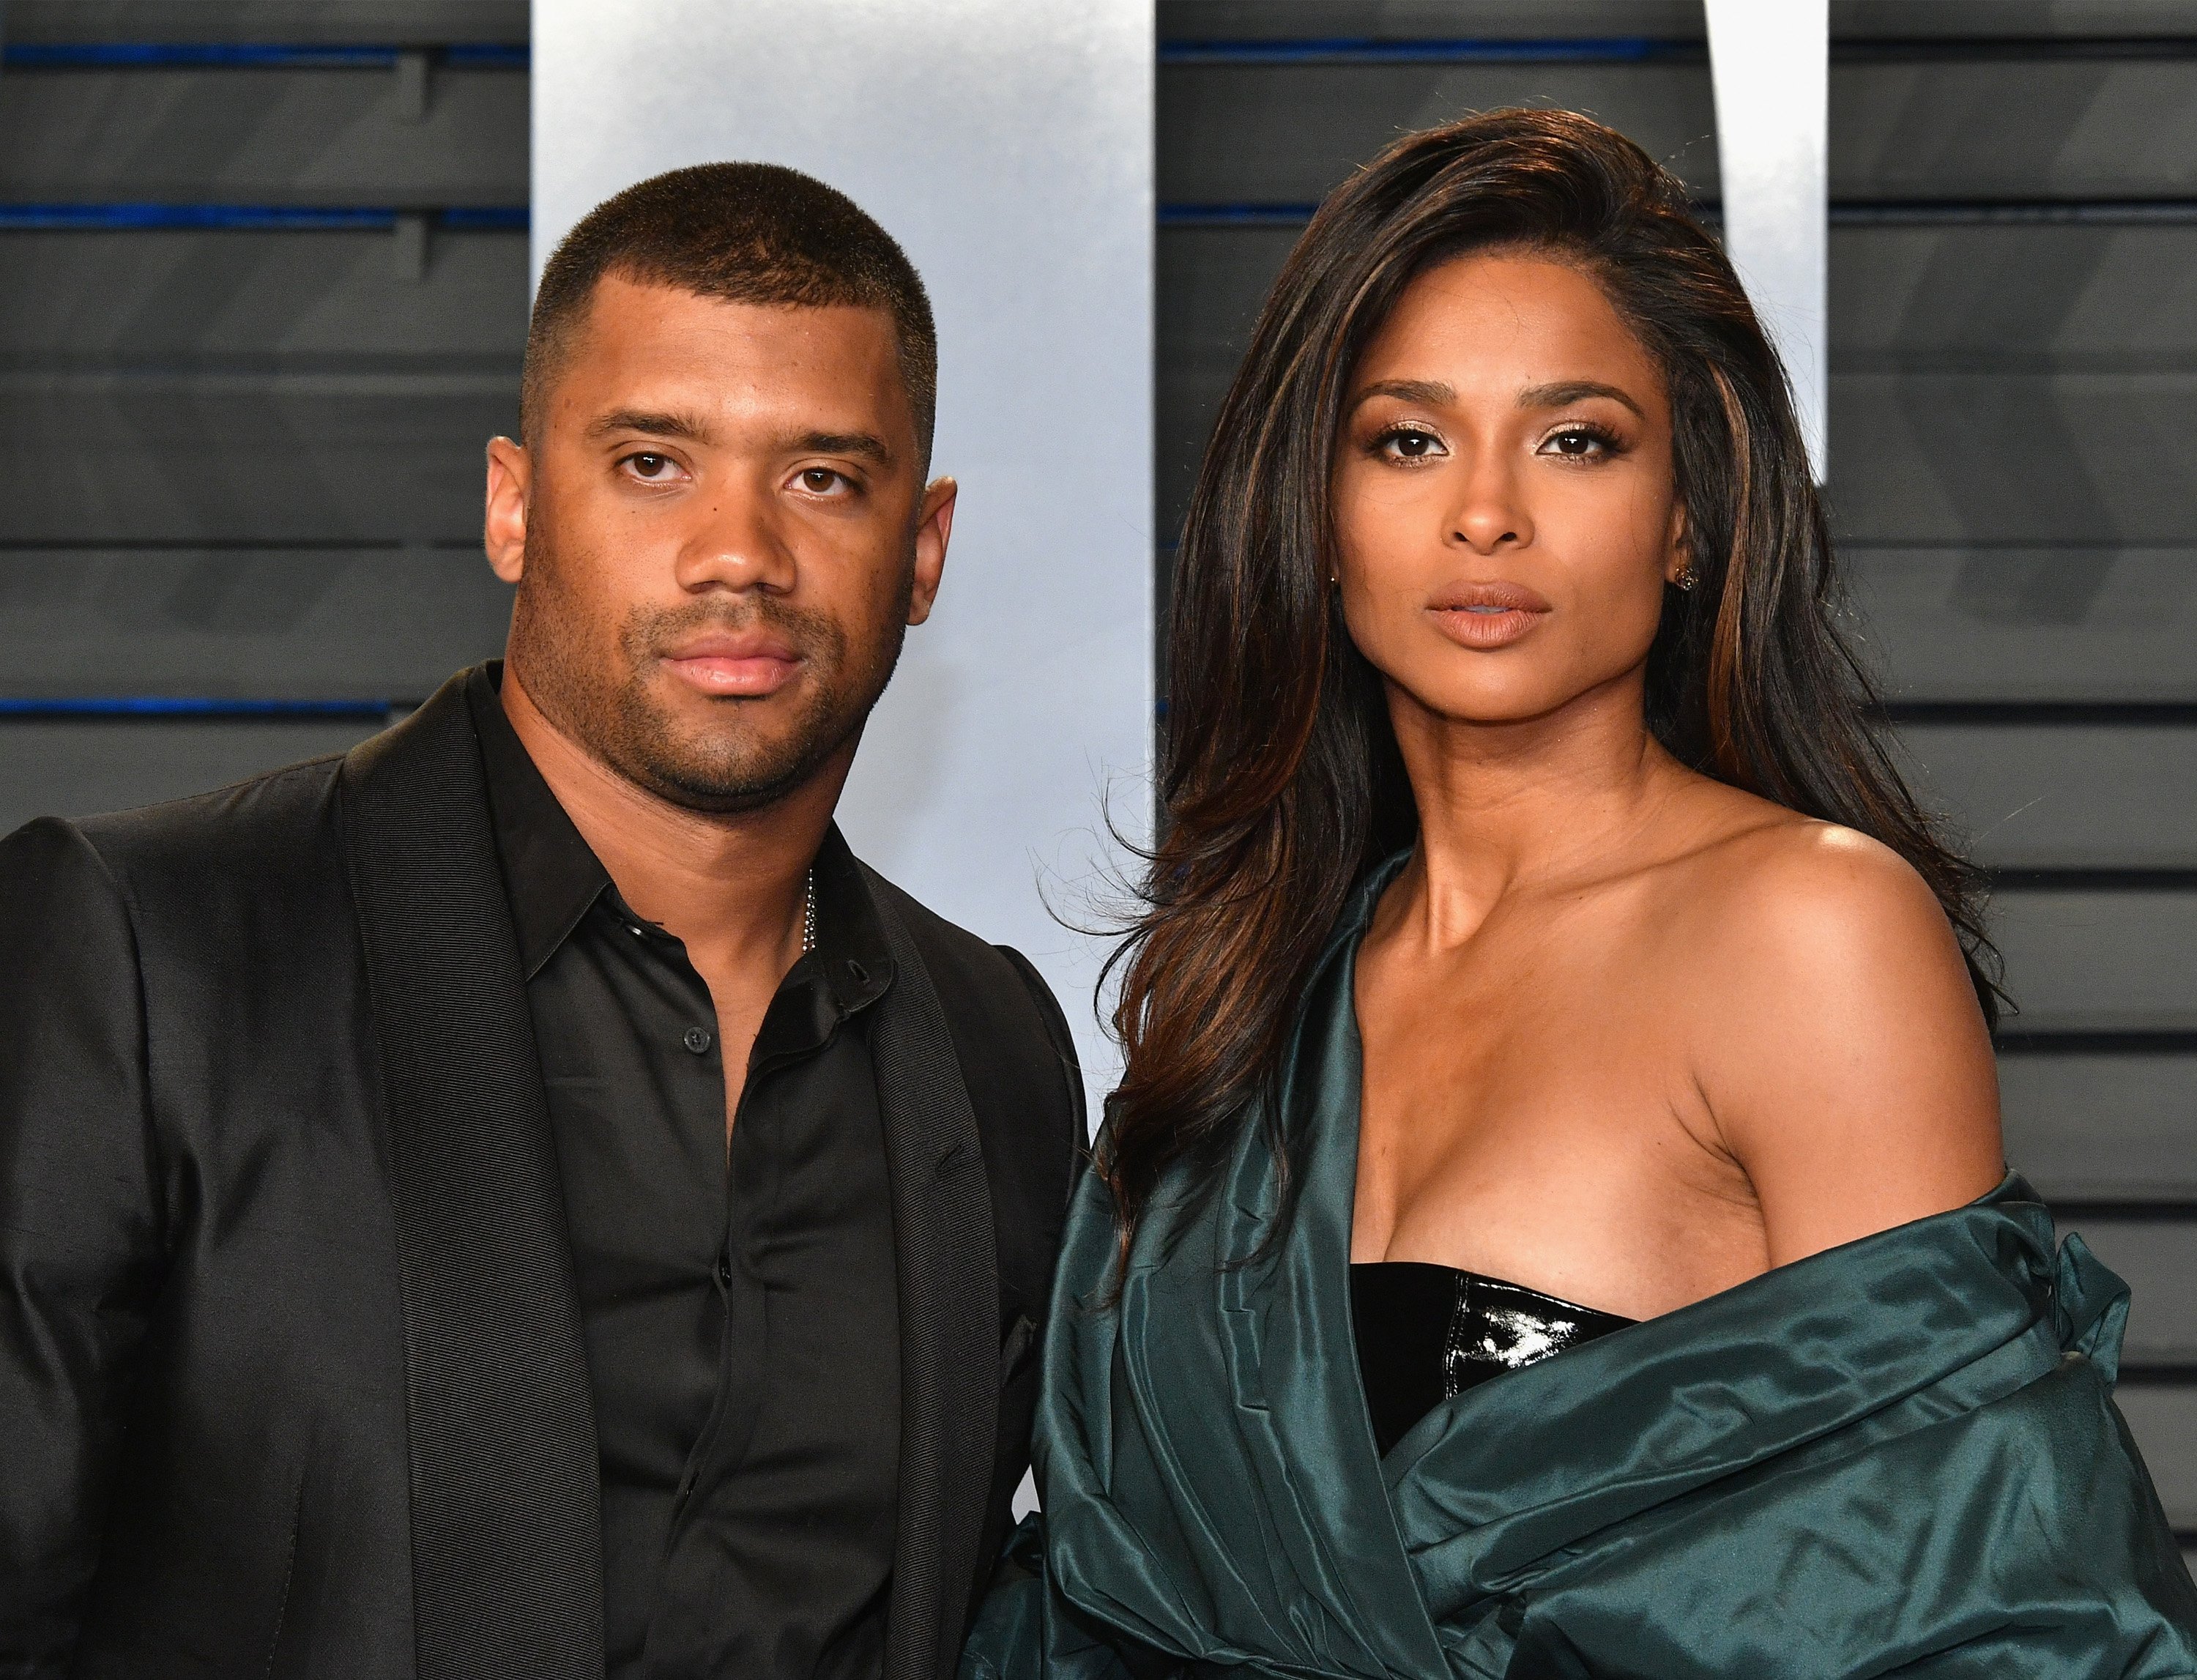 Russell Wilson & Ciara at a 2018 Vanity Fair Oscar Party on Mar. 4, 2018 in Beverly Hills. |Photo: Getty Images